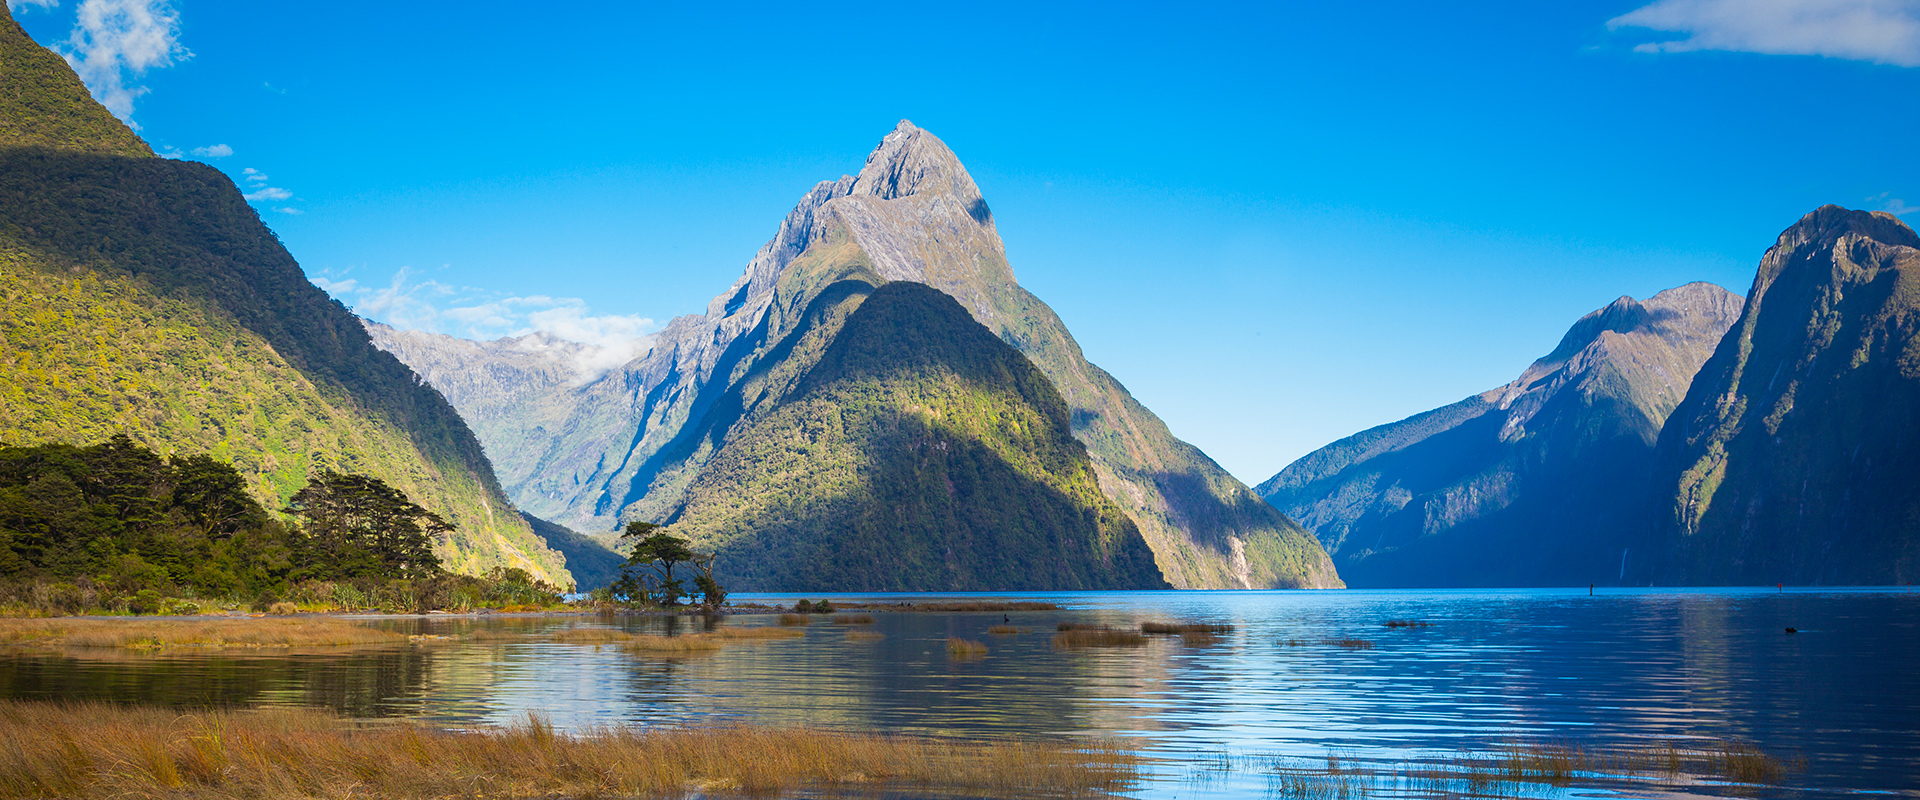 Sunny panoramic view of Milford Sound, South Island, NZ